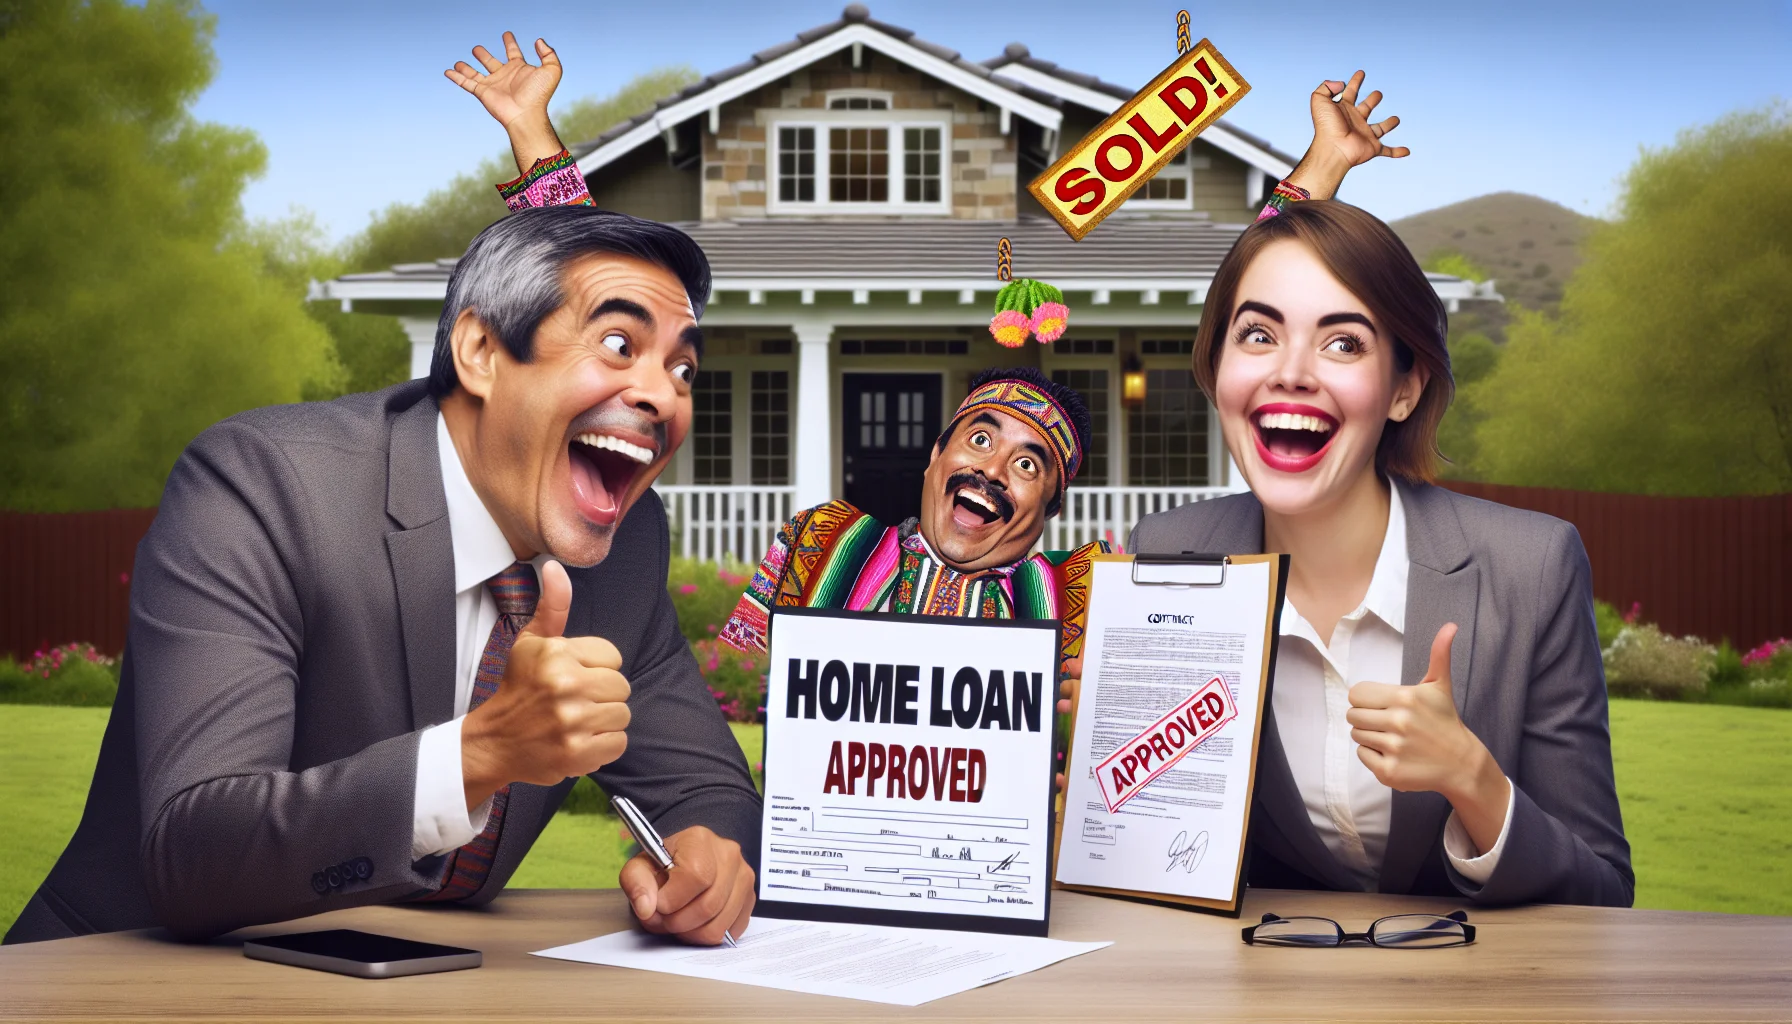 Create a humorous and realistic image representing an idyllic scenario in the USA's home loan environment. Detail a jubilant middle-aged Hispanic man, and a joyous younger South Asian woman, both dressed professionally, sealing a property deal. The background should be a beautiful crafted suburban bungalow with lush gardens and a 'Sold' signpost. Also show the contract with the words 'Home Loan Approved' prominently visible. Incorporate subtle fun elements that celebrate the ease and success of procuring a home loan.